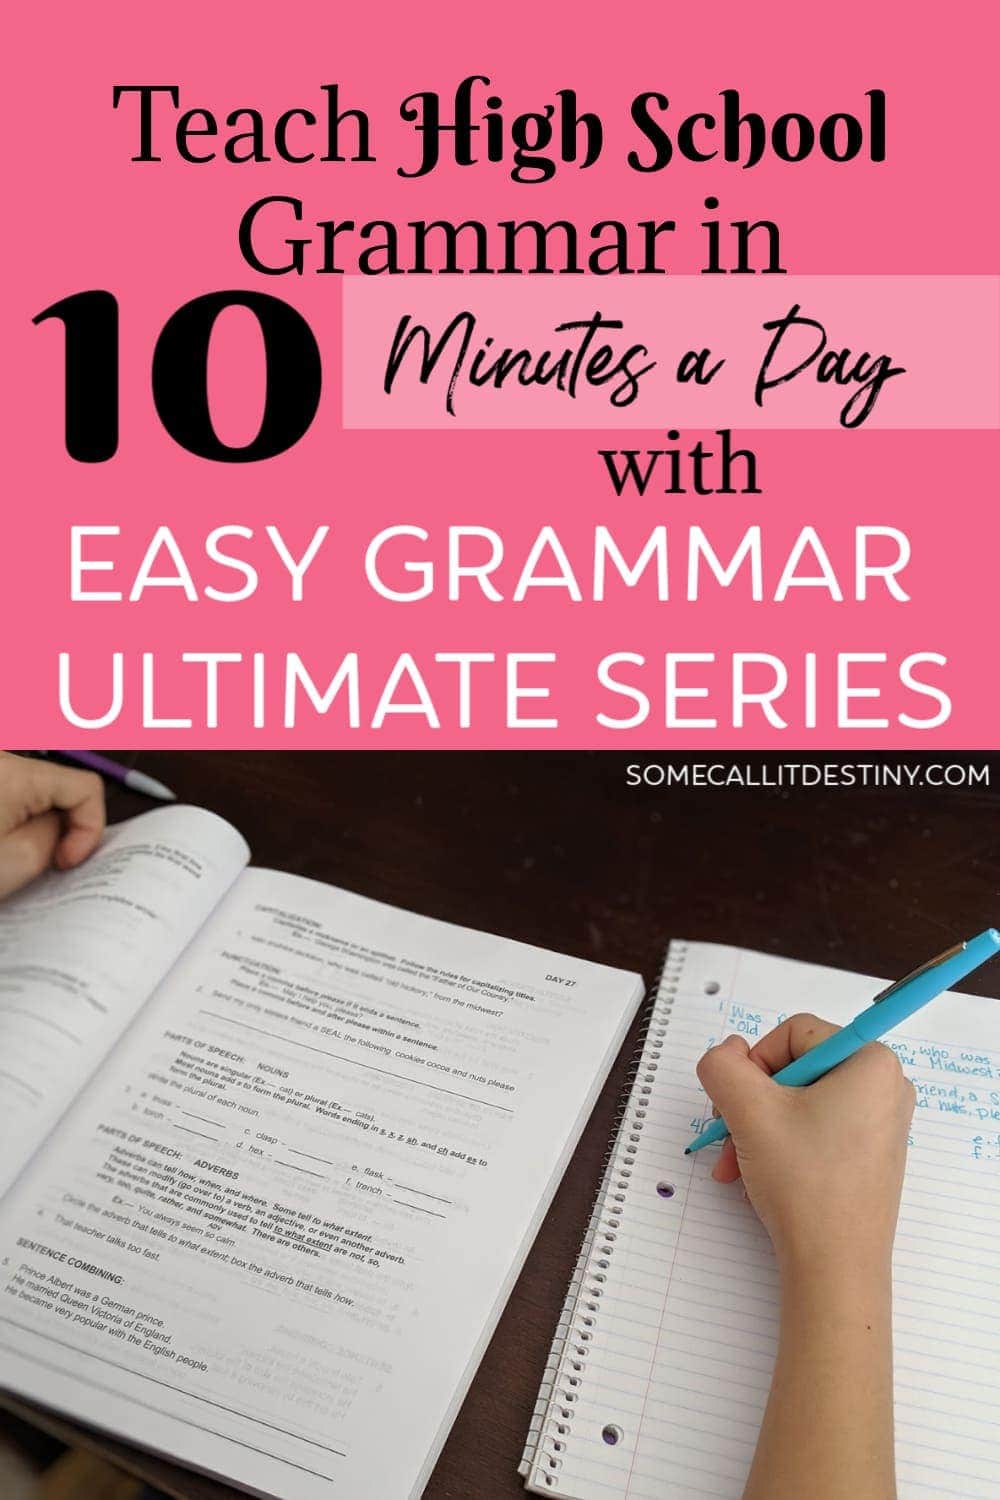 Teach high school grammar in 10 minutes a day with Easy Grammar Ultimate Series